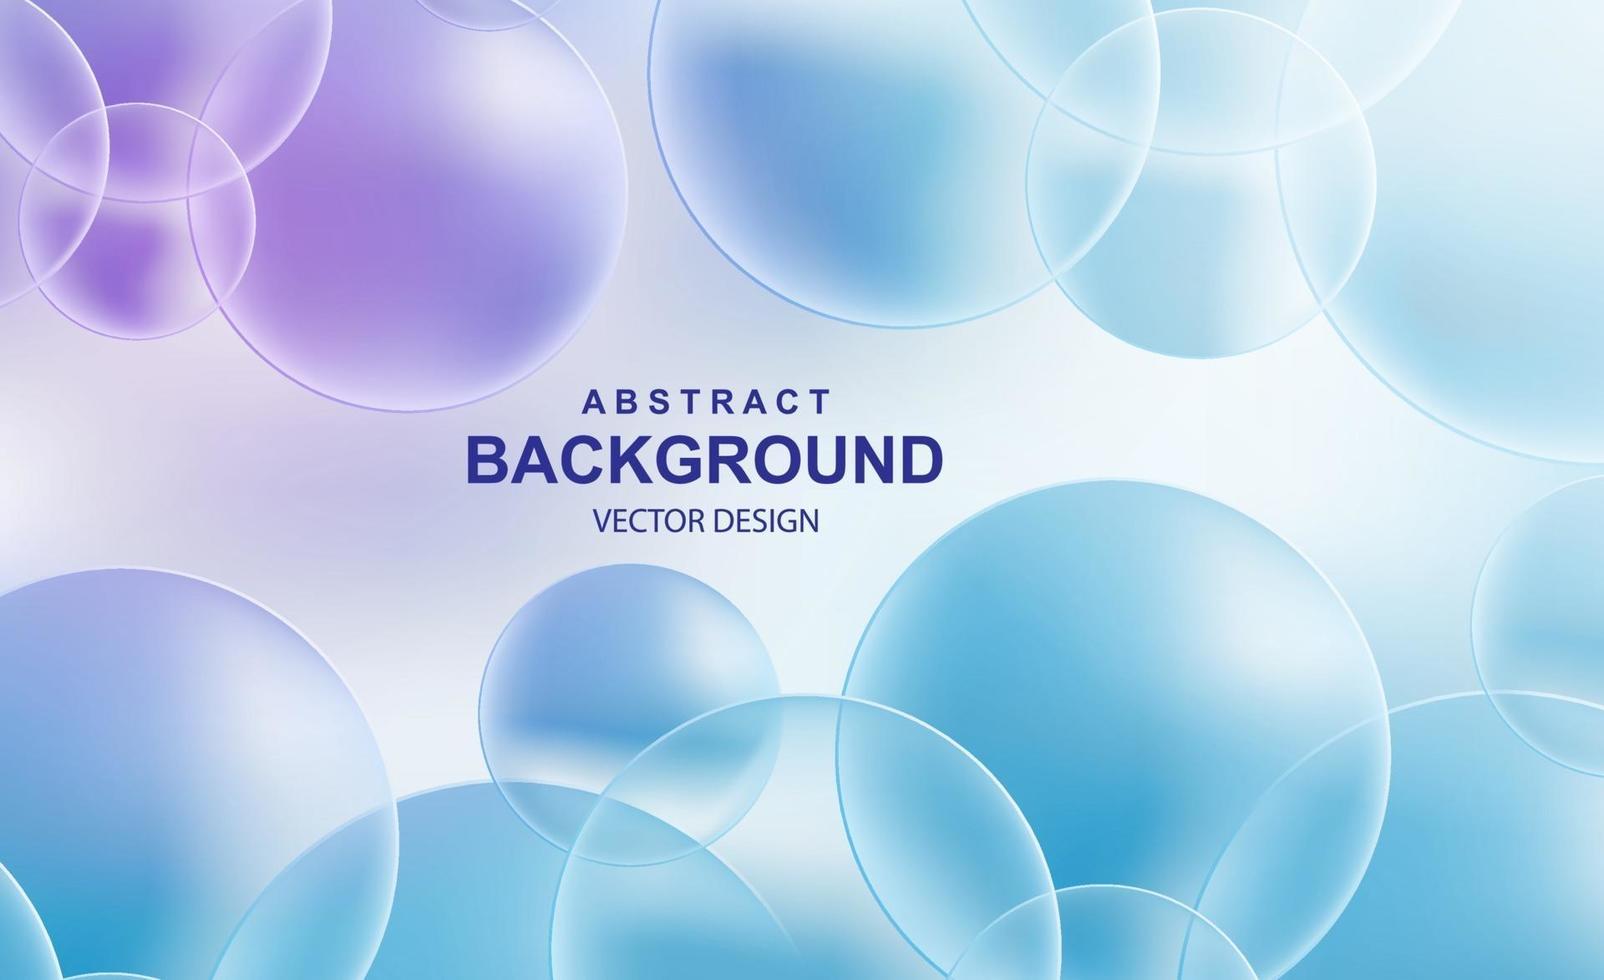 Abstract background with transparent balls vector